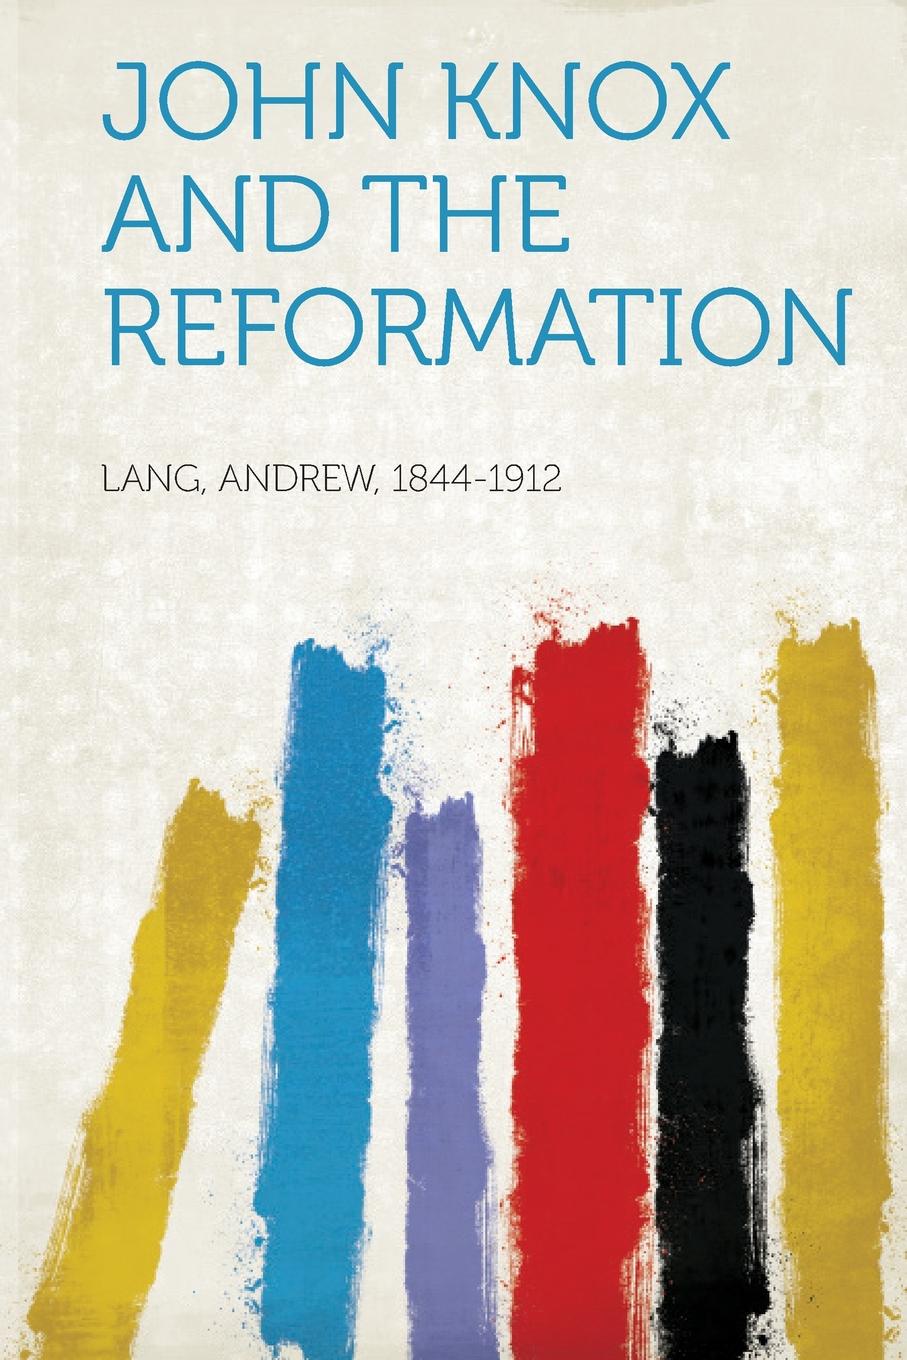 John Knox and the Reformation